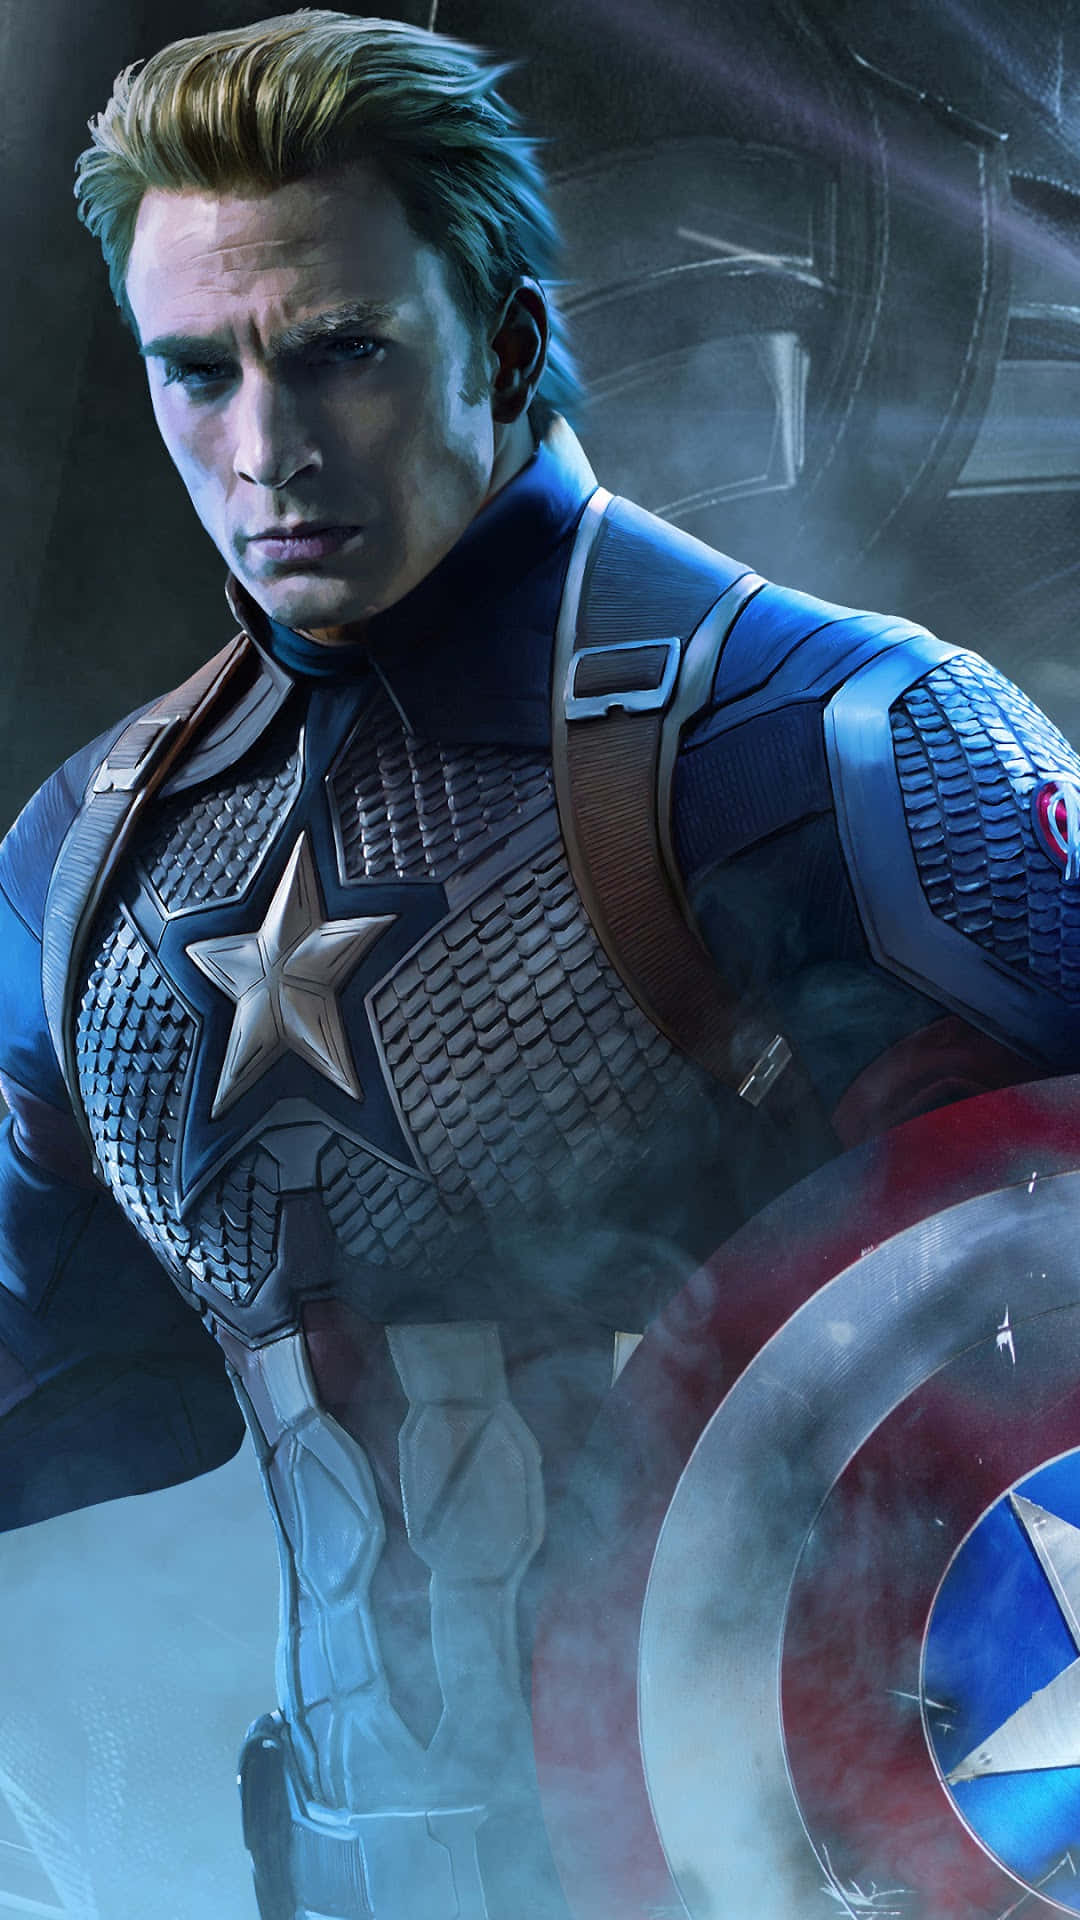 "The heroic Captain America stands prepared to fight the forces of evil."